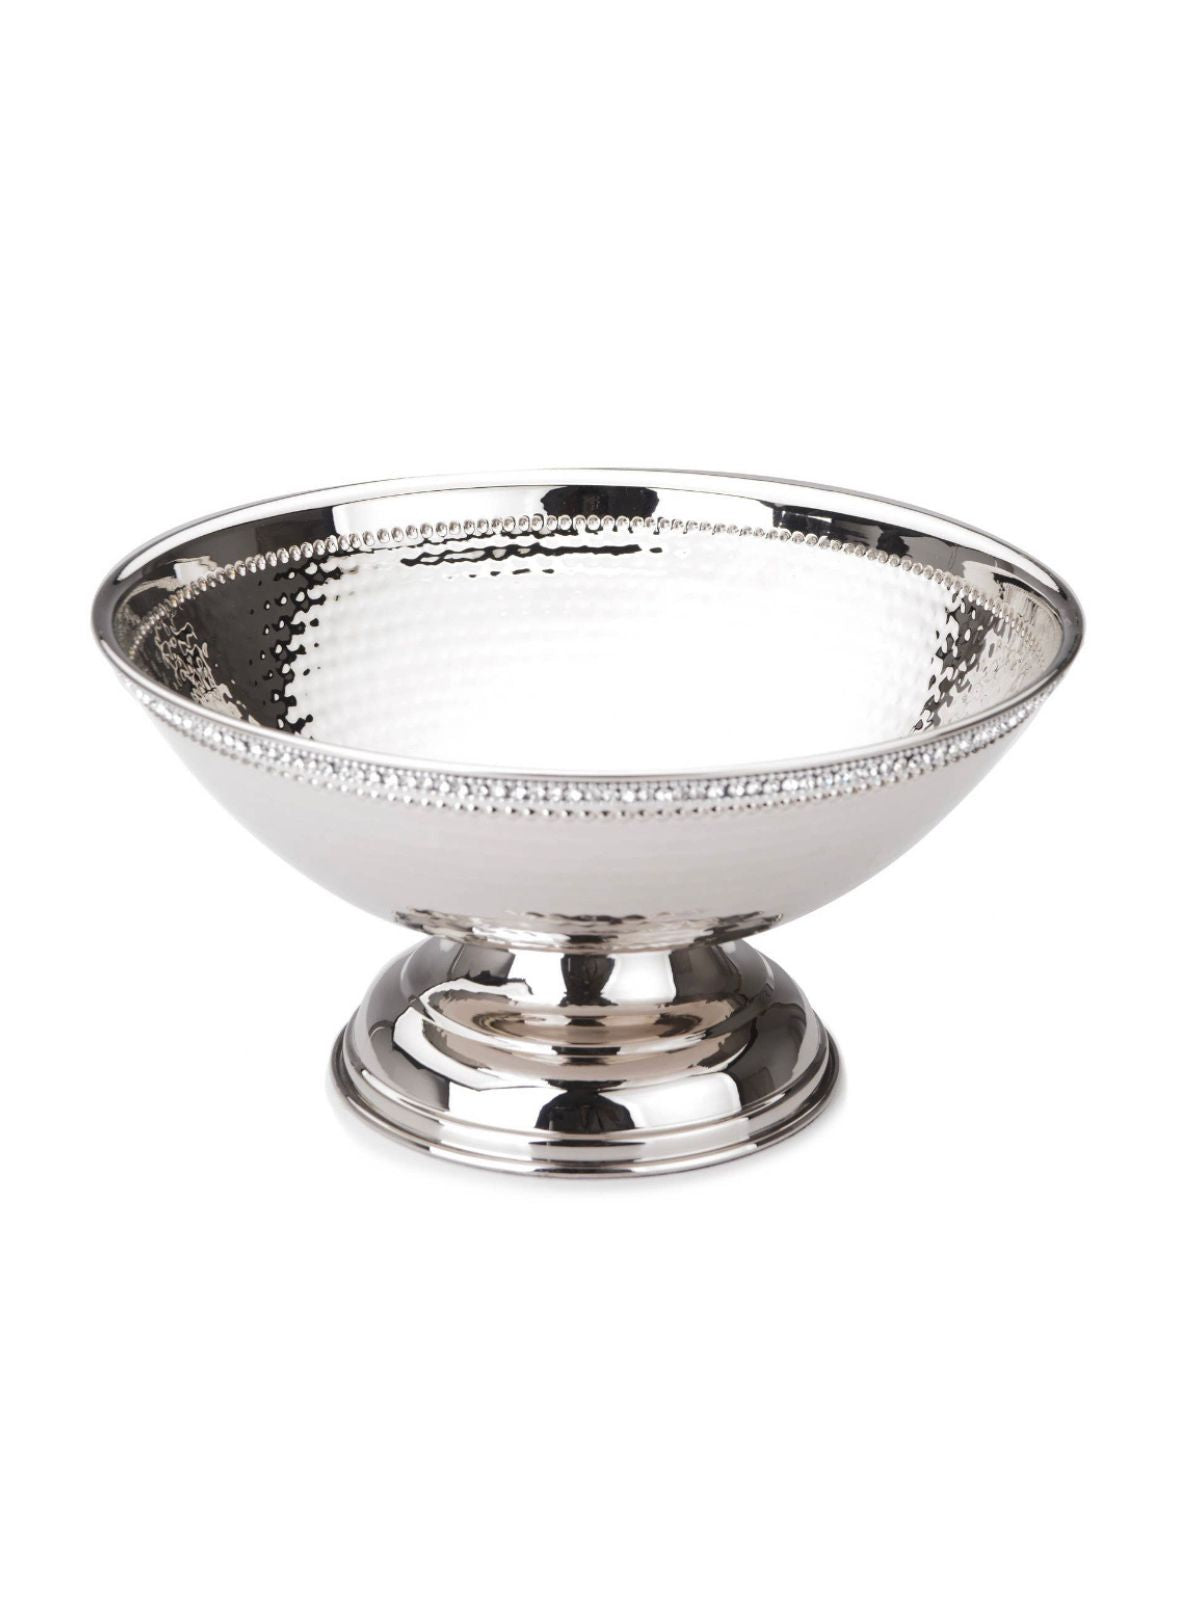 11.25D Round hammered stainless steel footed bowl trimmed with sparkling diamond crystals.